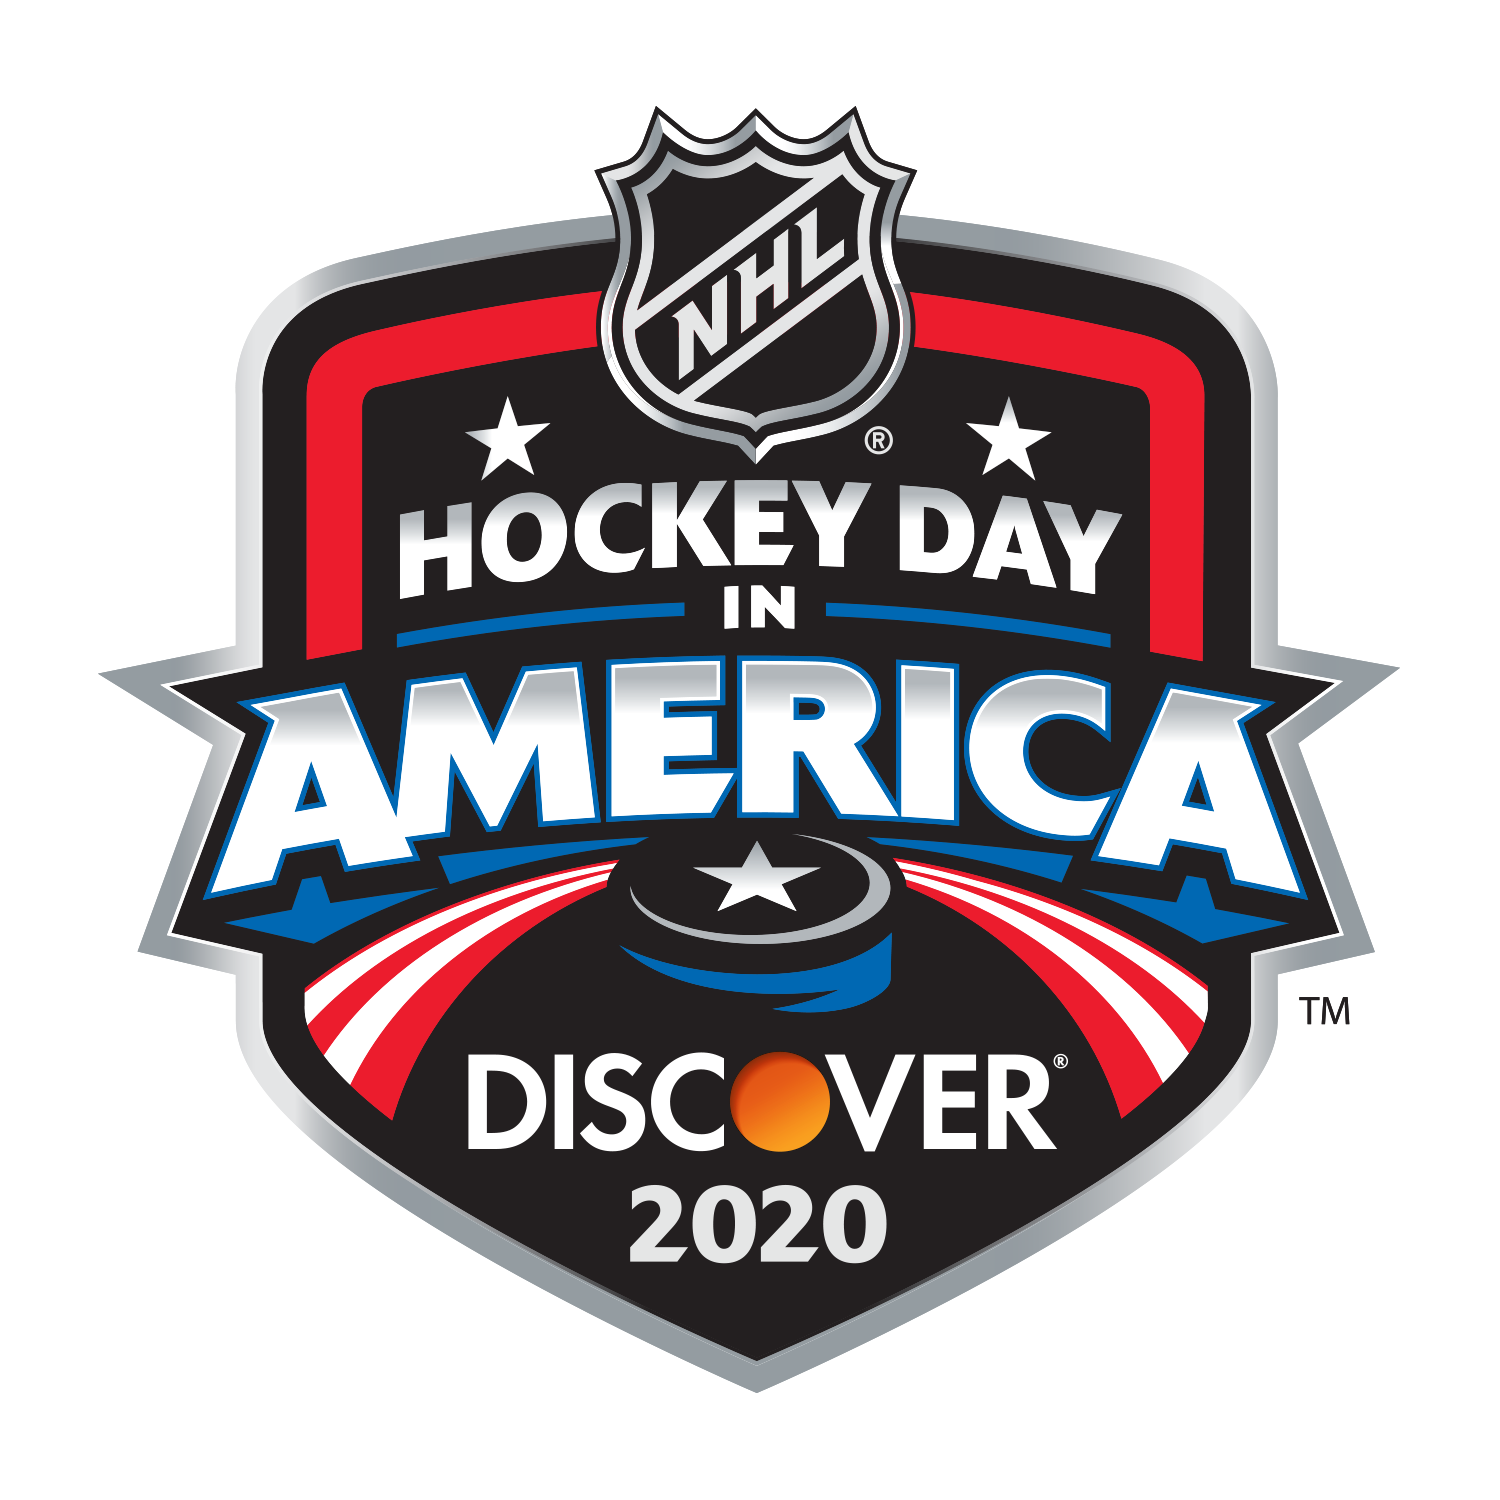 NBC SPORTS CELEBRATES HOCKEY DAY IN AMERICA, PRESENTED BY DISCOVER